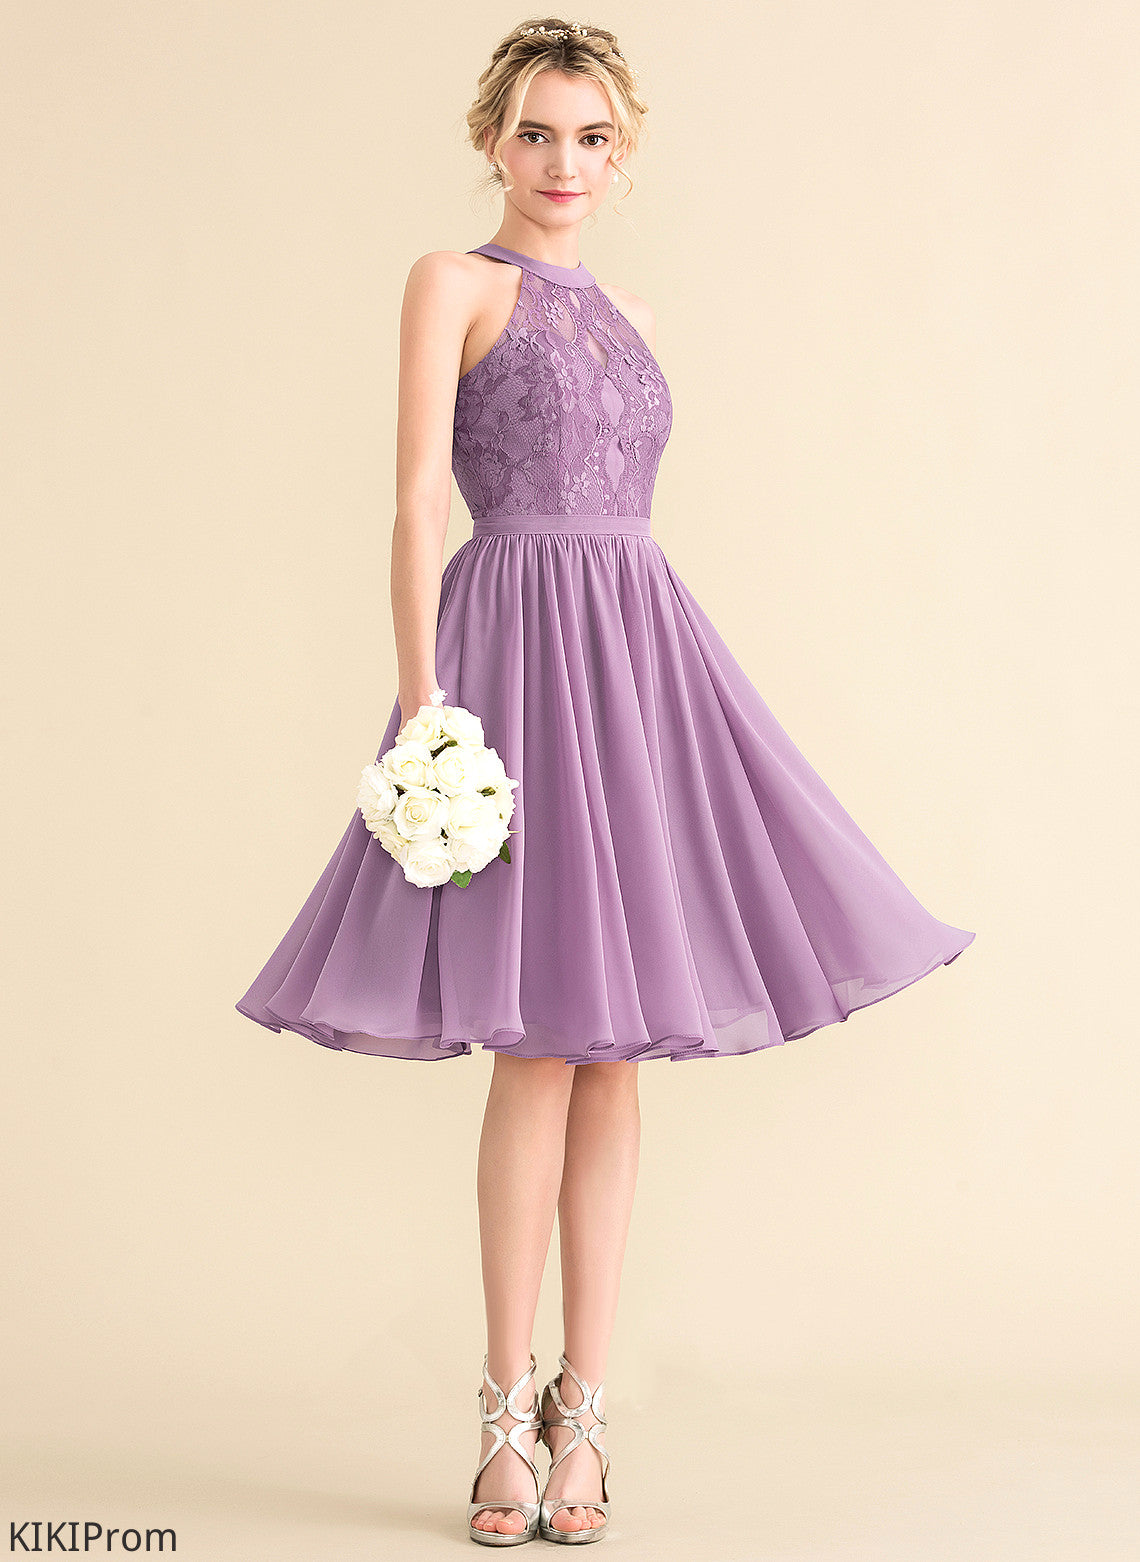 Dahlia Dress Lace A-Line Homecoming Neck With Lace Chiffon Knee-Length Scoop Homecoming Dresses